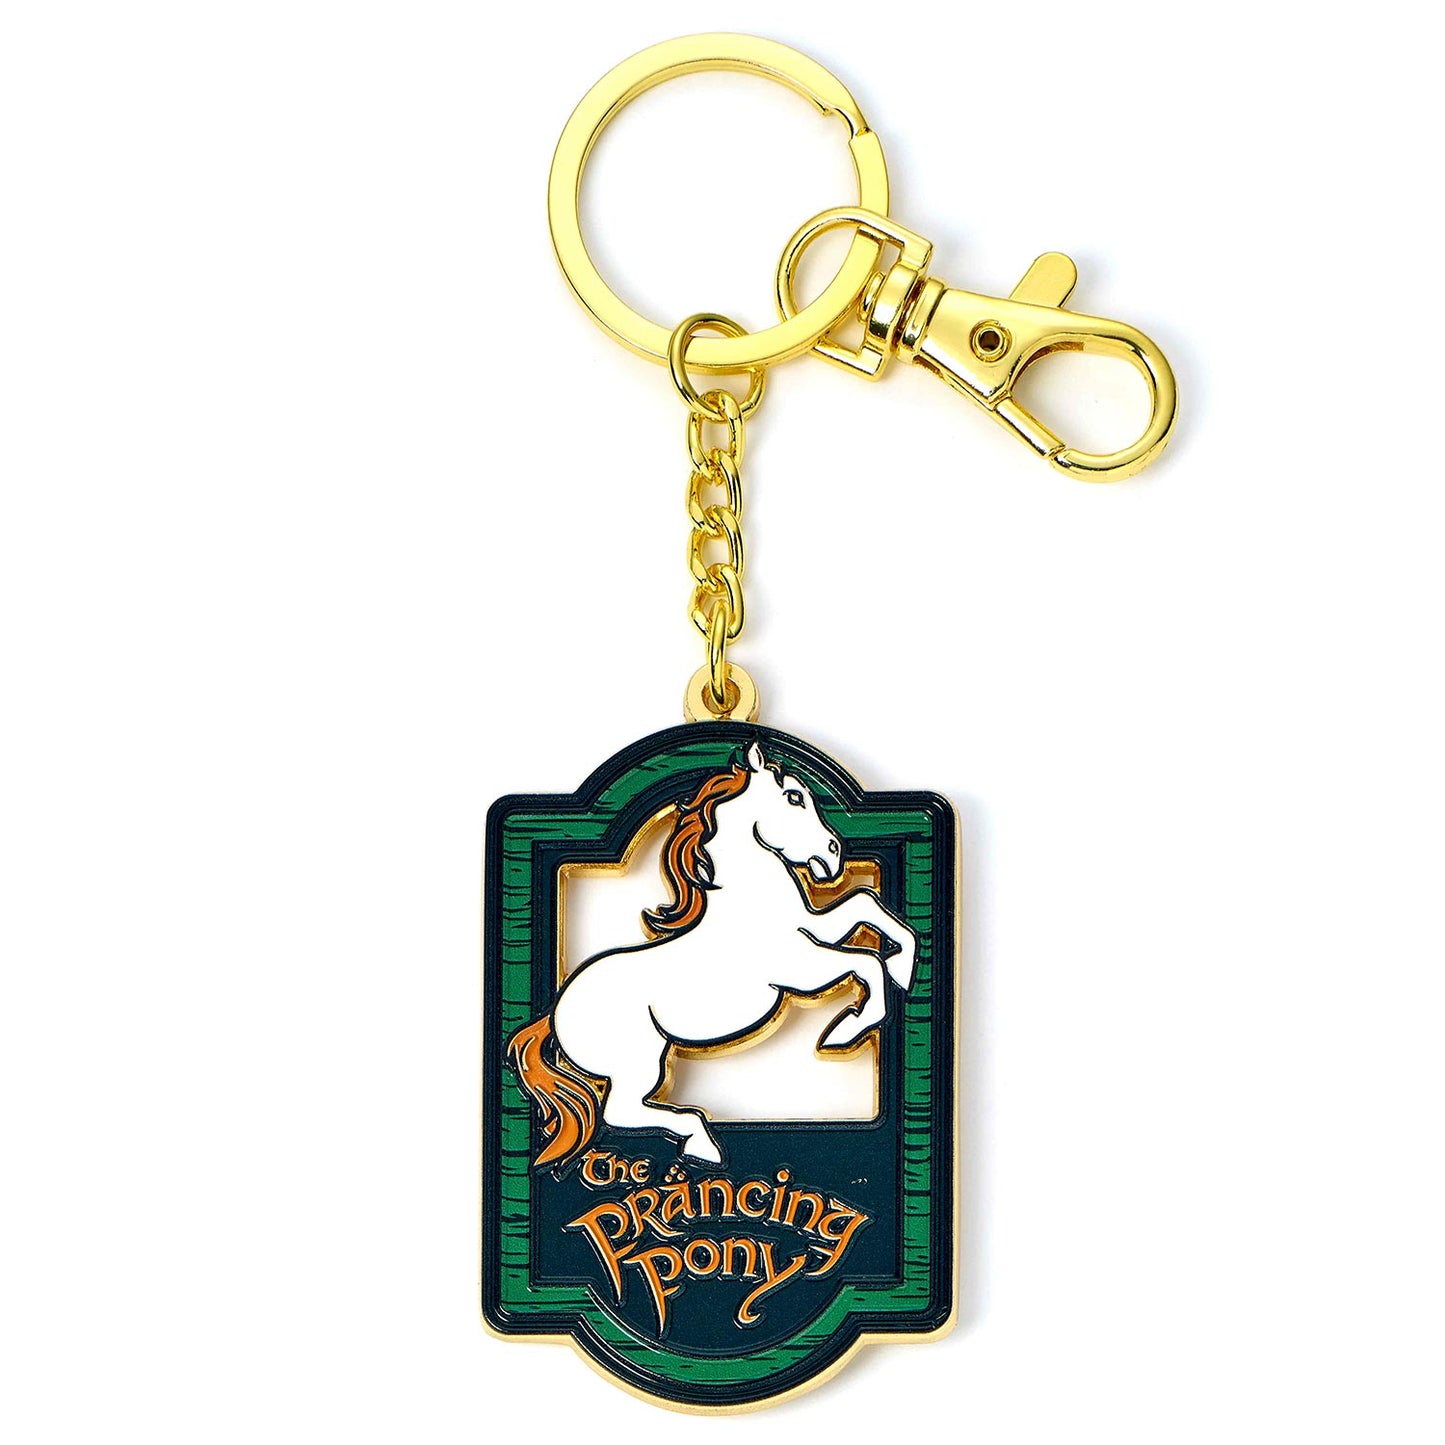 Keyring - The Lord of The Rings - Official - Prancing Pony Pub Sign